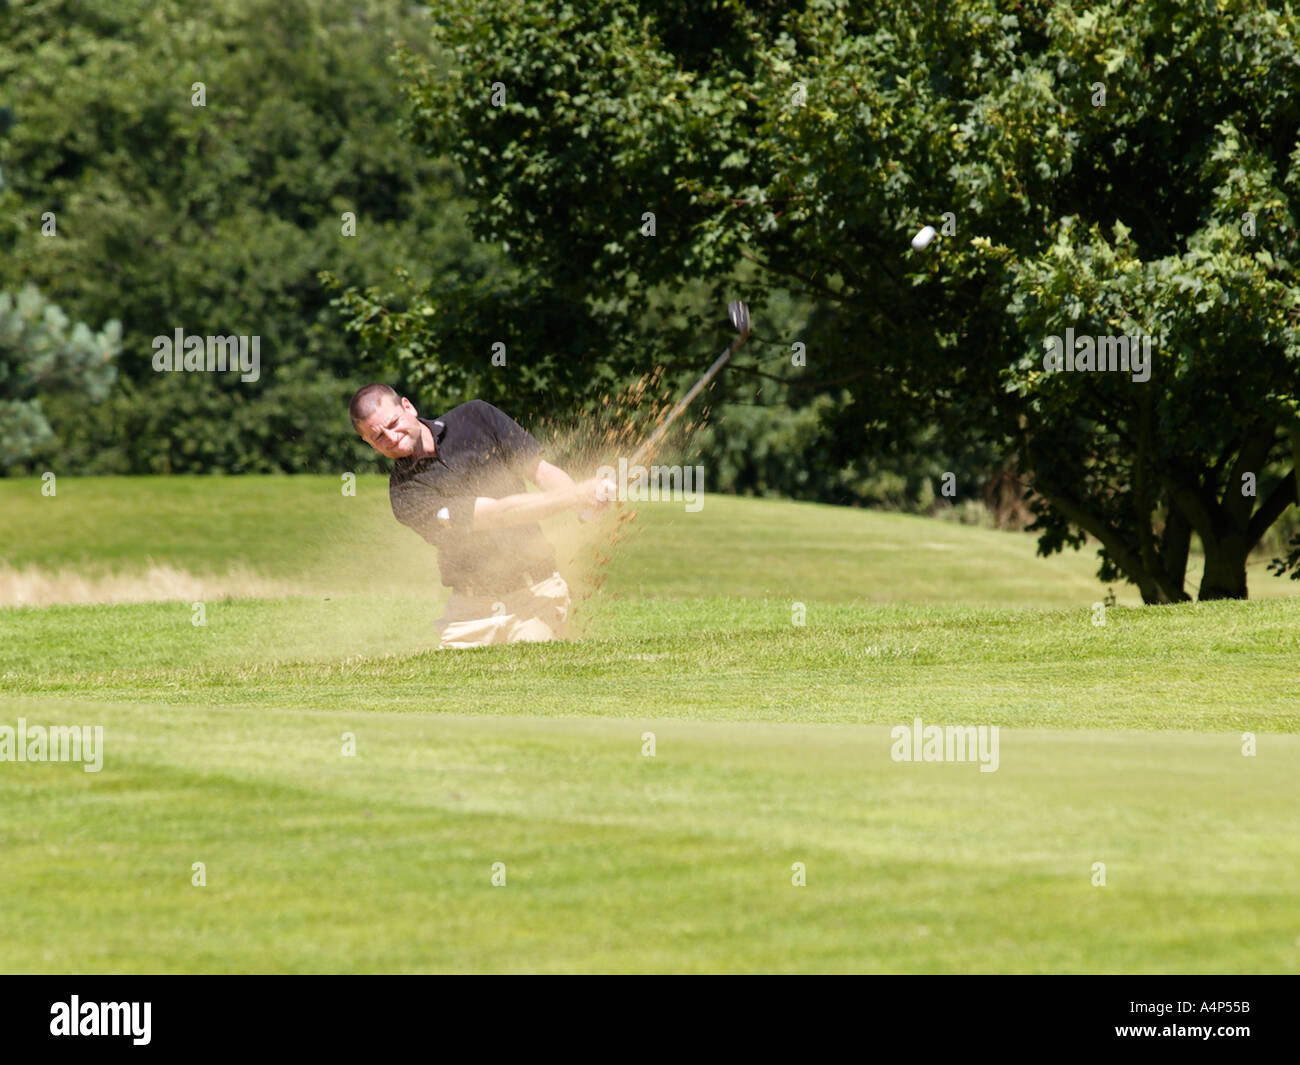 BUNKER SHOT AT THE PGA EUROPRO GOLF TOUR 2004 SPROWSTON MANOR MARRIOTT HOTELS TOUR EVENT SPROWSTON NORWICH NORFOLK EAST ANGLIA Stock Photo